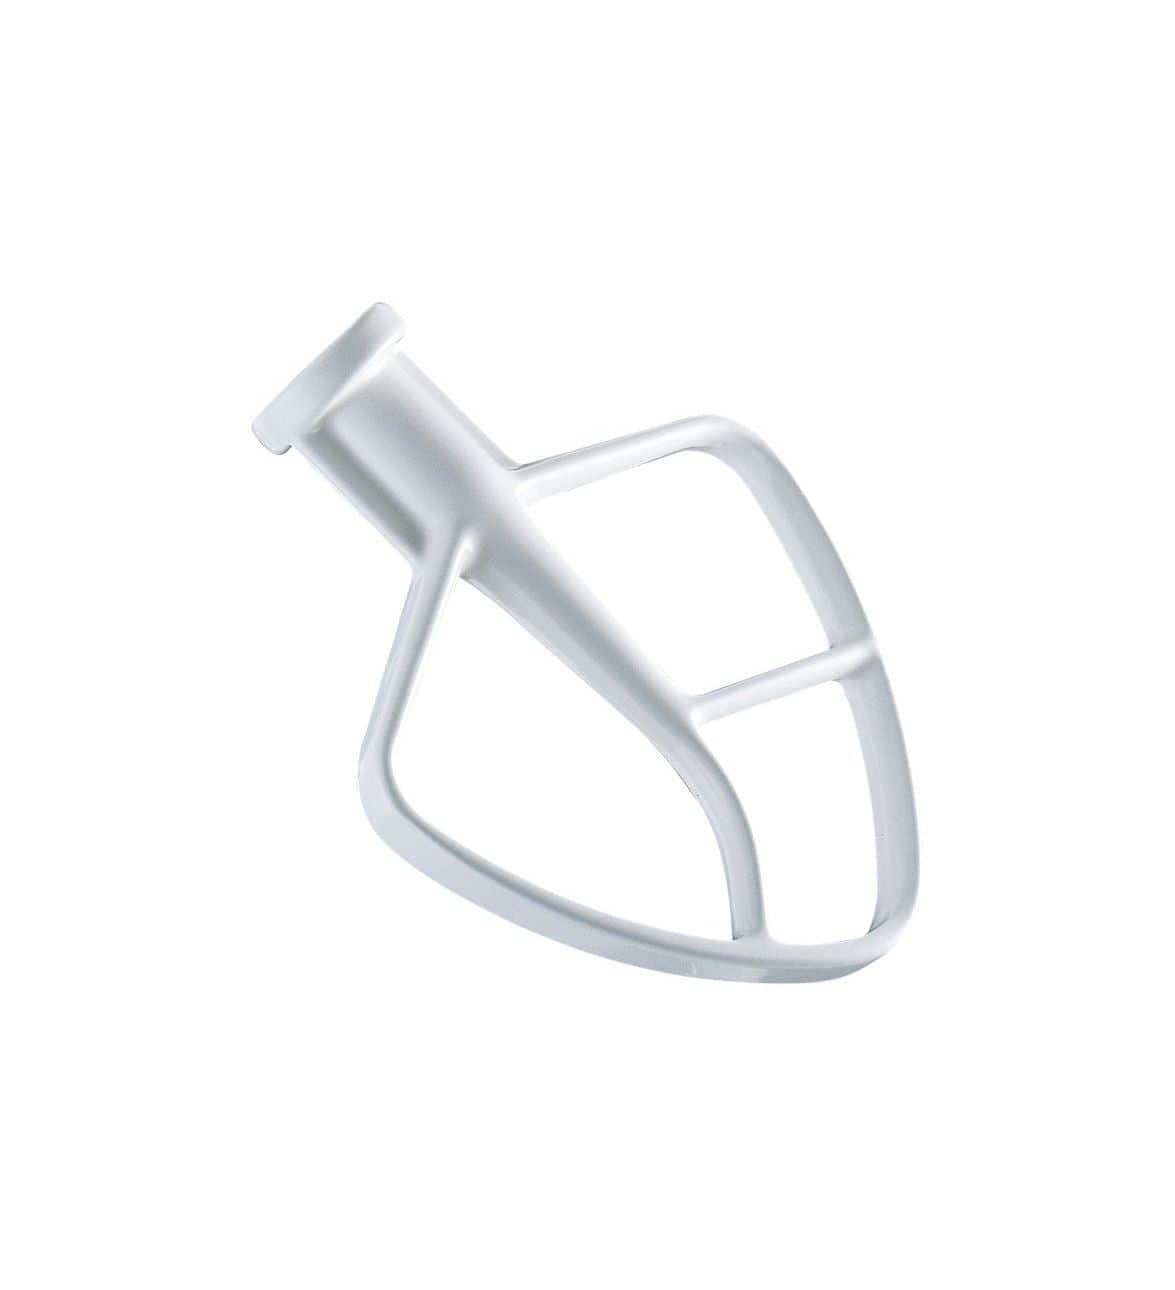 W10490648 Beaters for Kitchen Aid Hand Mixer 2 Per Pack by Femitu